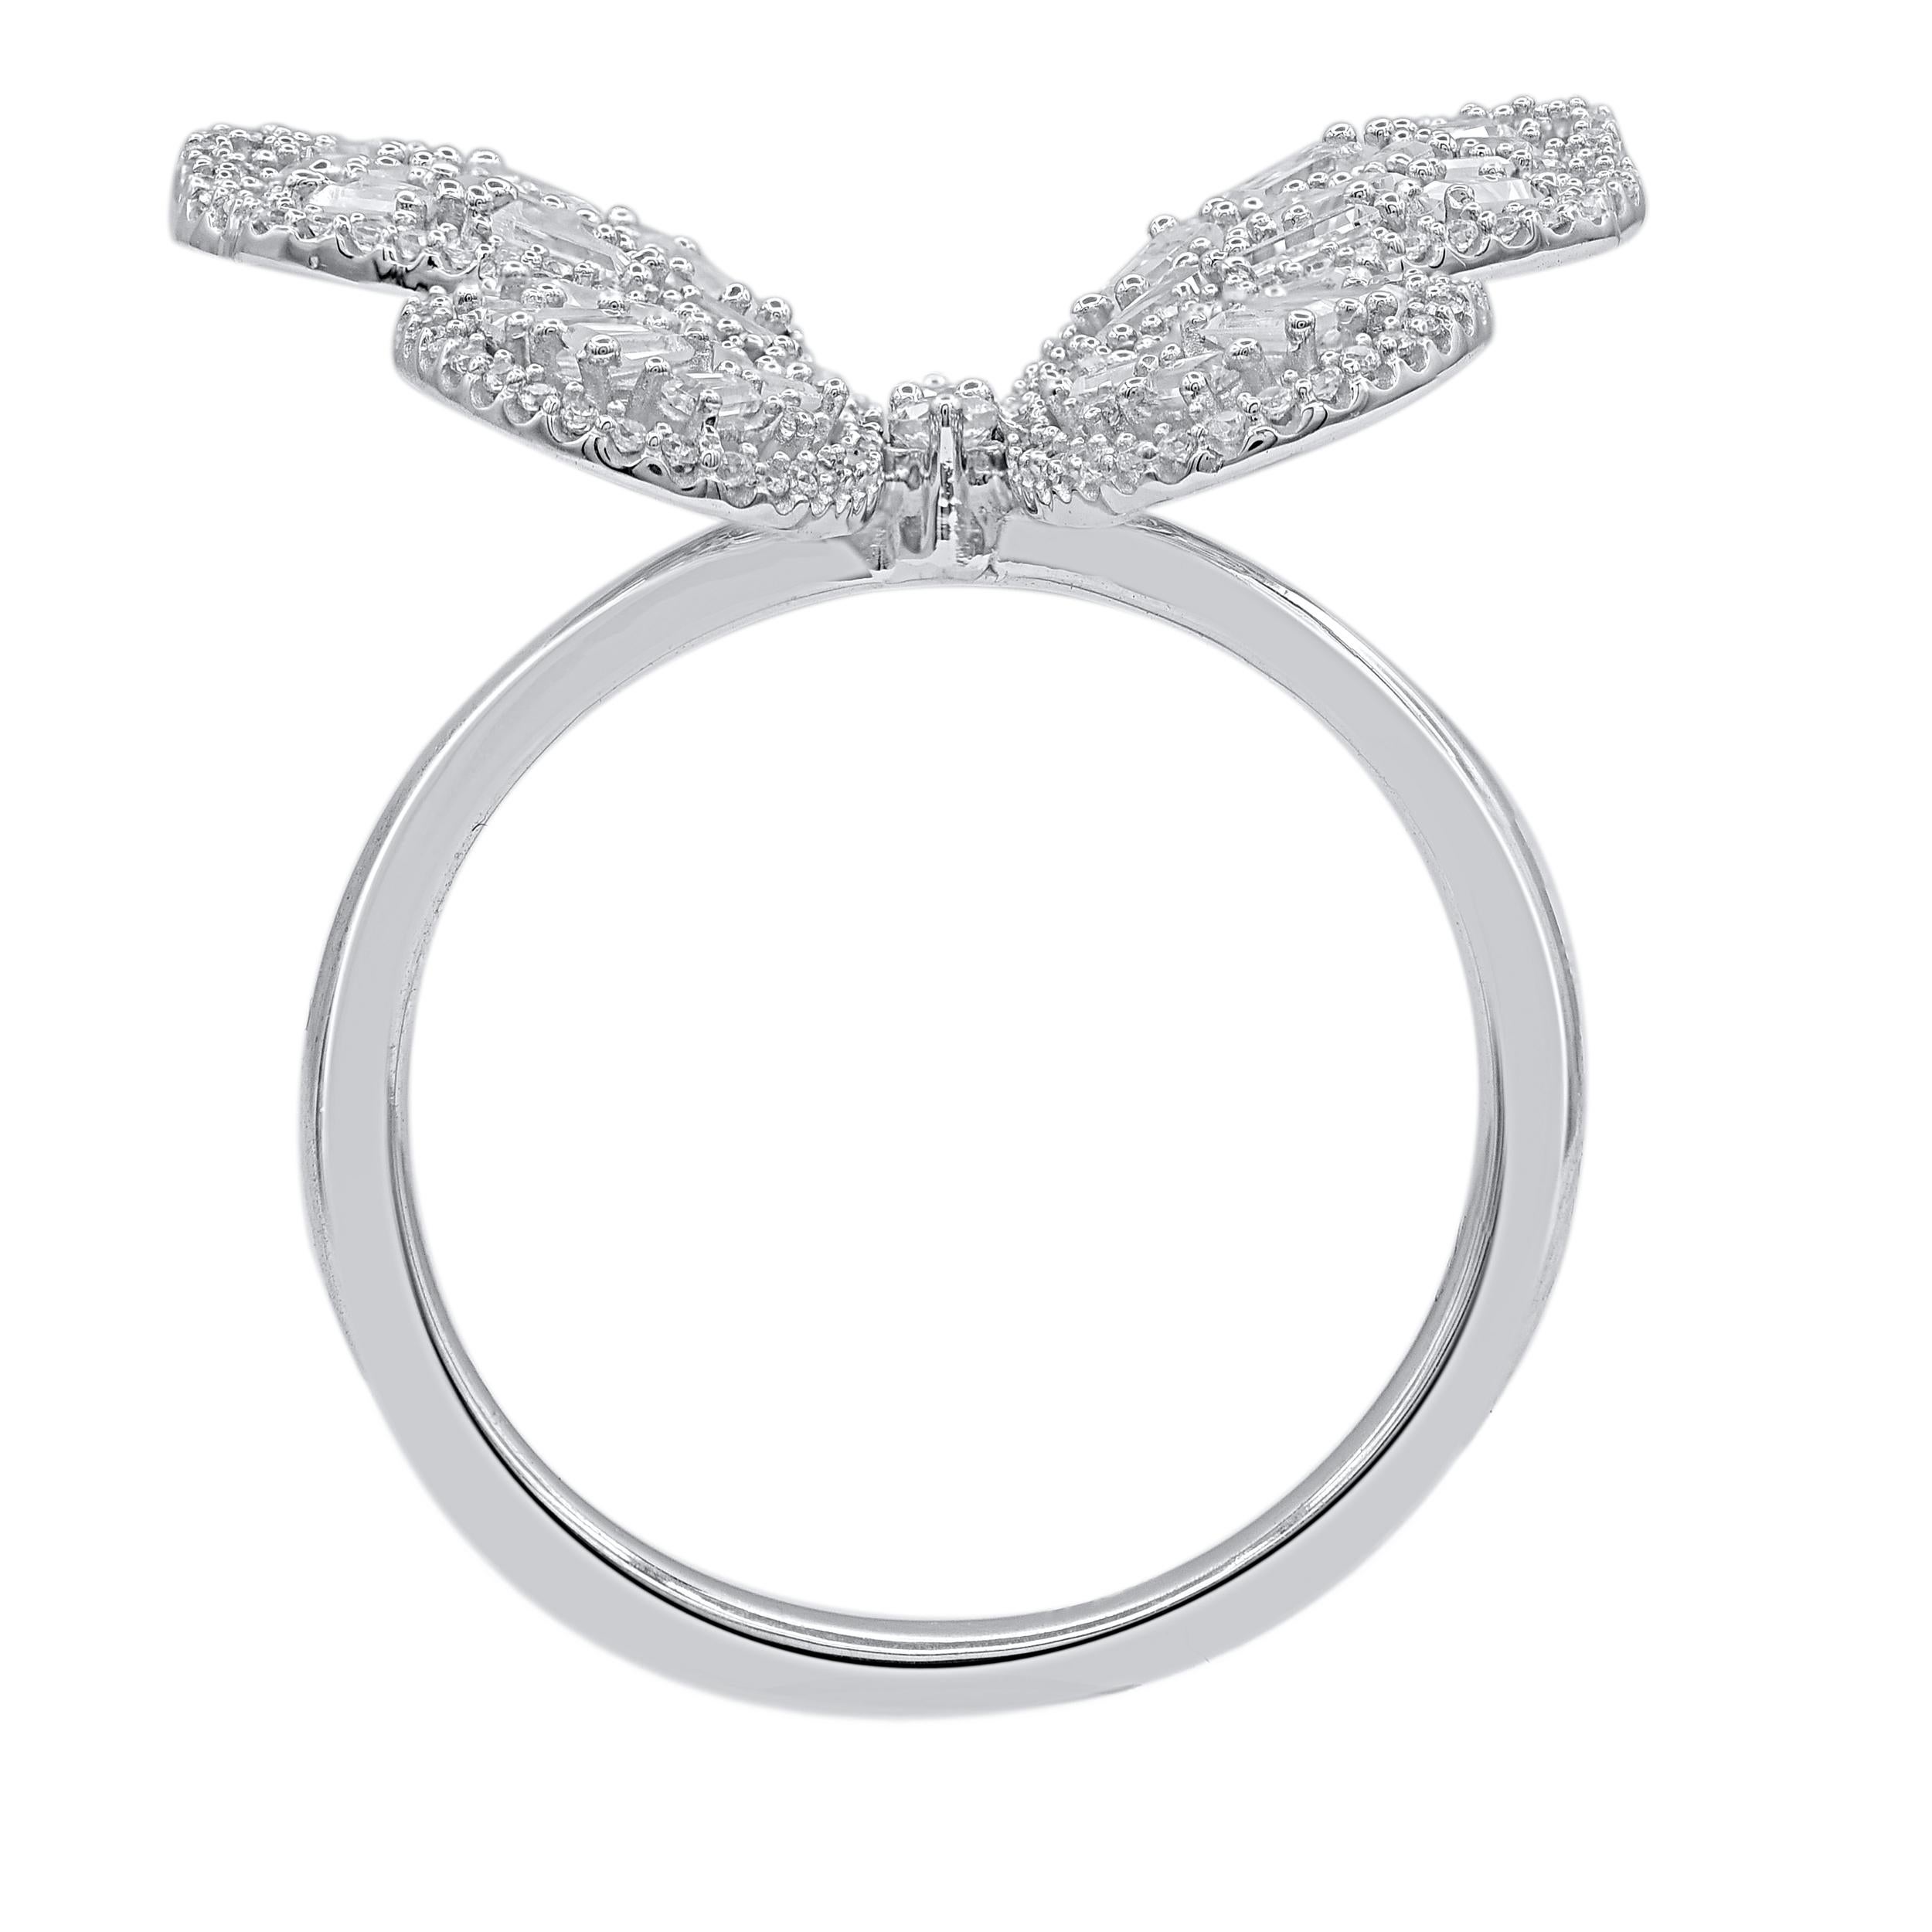 This butterfly ring adds a touch of whimsy to any attire.  This ring is beautifully crafted in 14 karat white gold and embedded with 182 single cut, brilliant cut & baguette diamond set in prong setting. The total weight of diamonds 1.0 carat. The